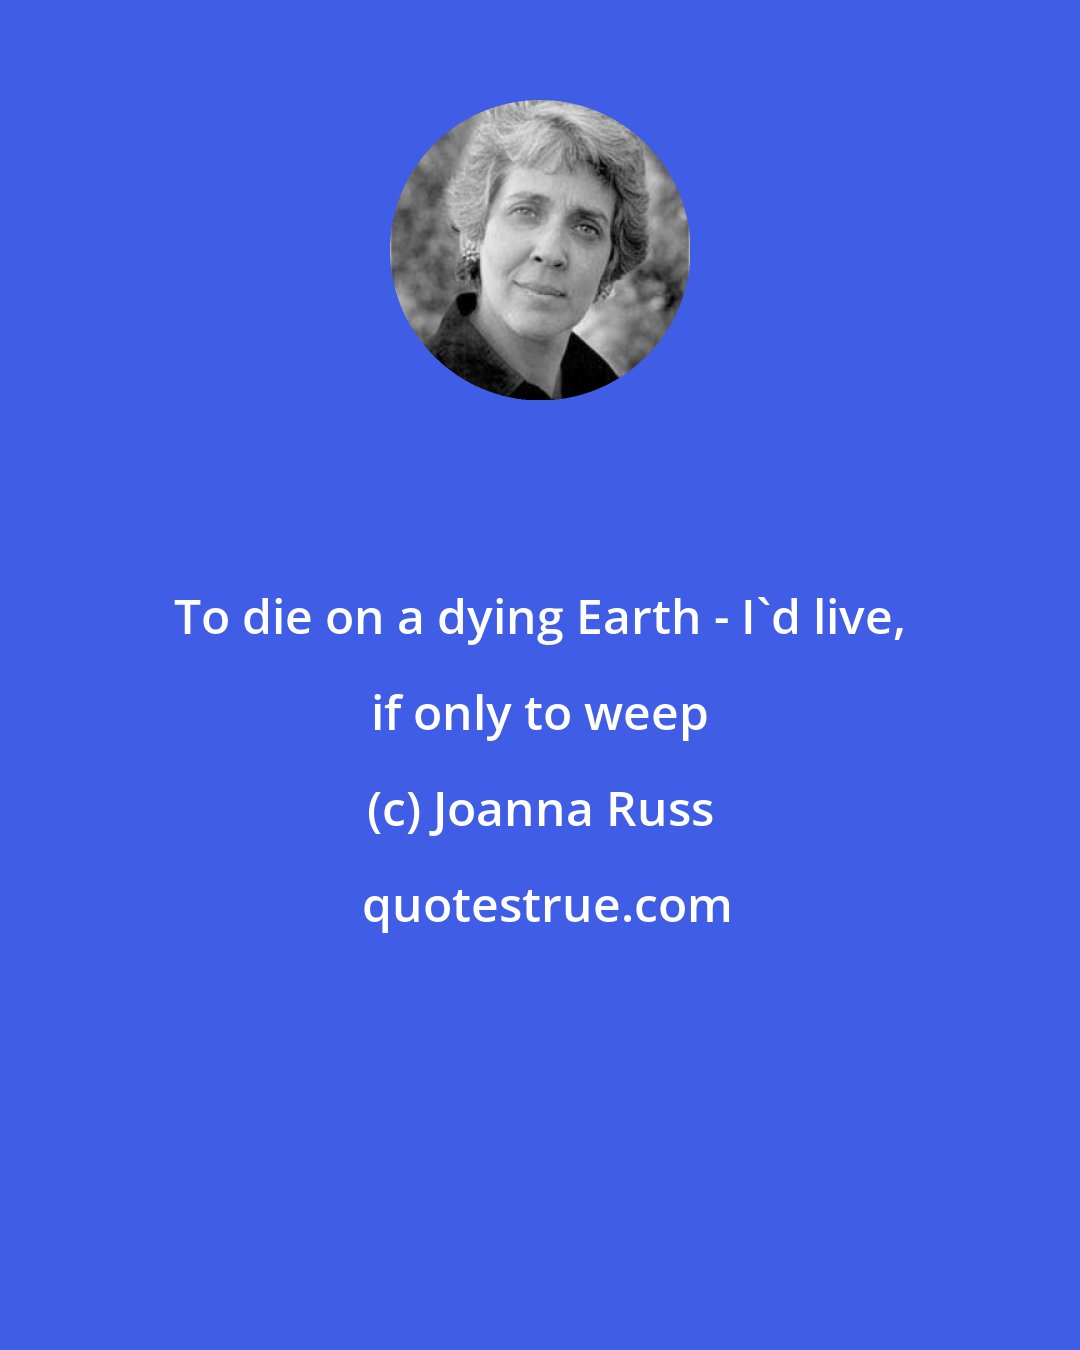 Joanna Russ: To die on a dying Earth - I'd live, if only to weep